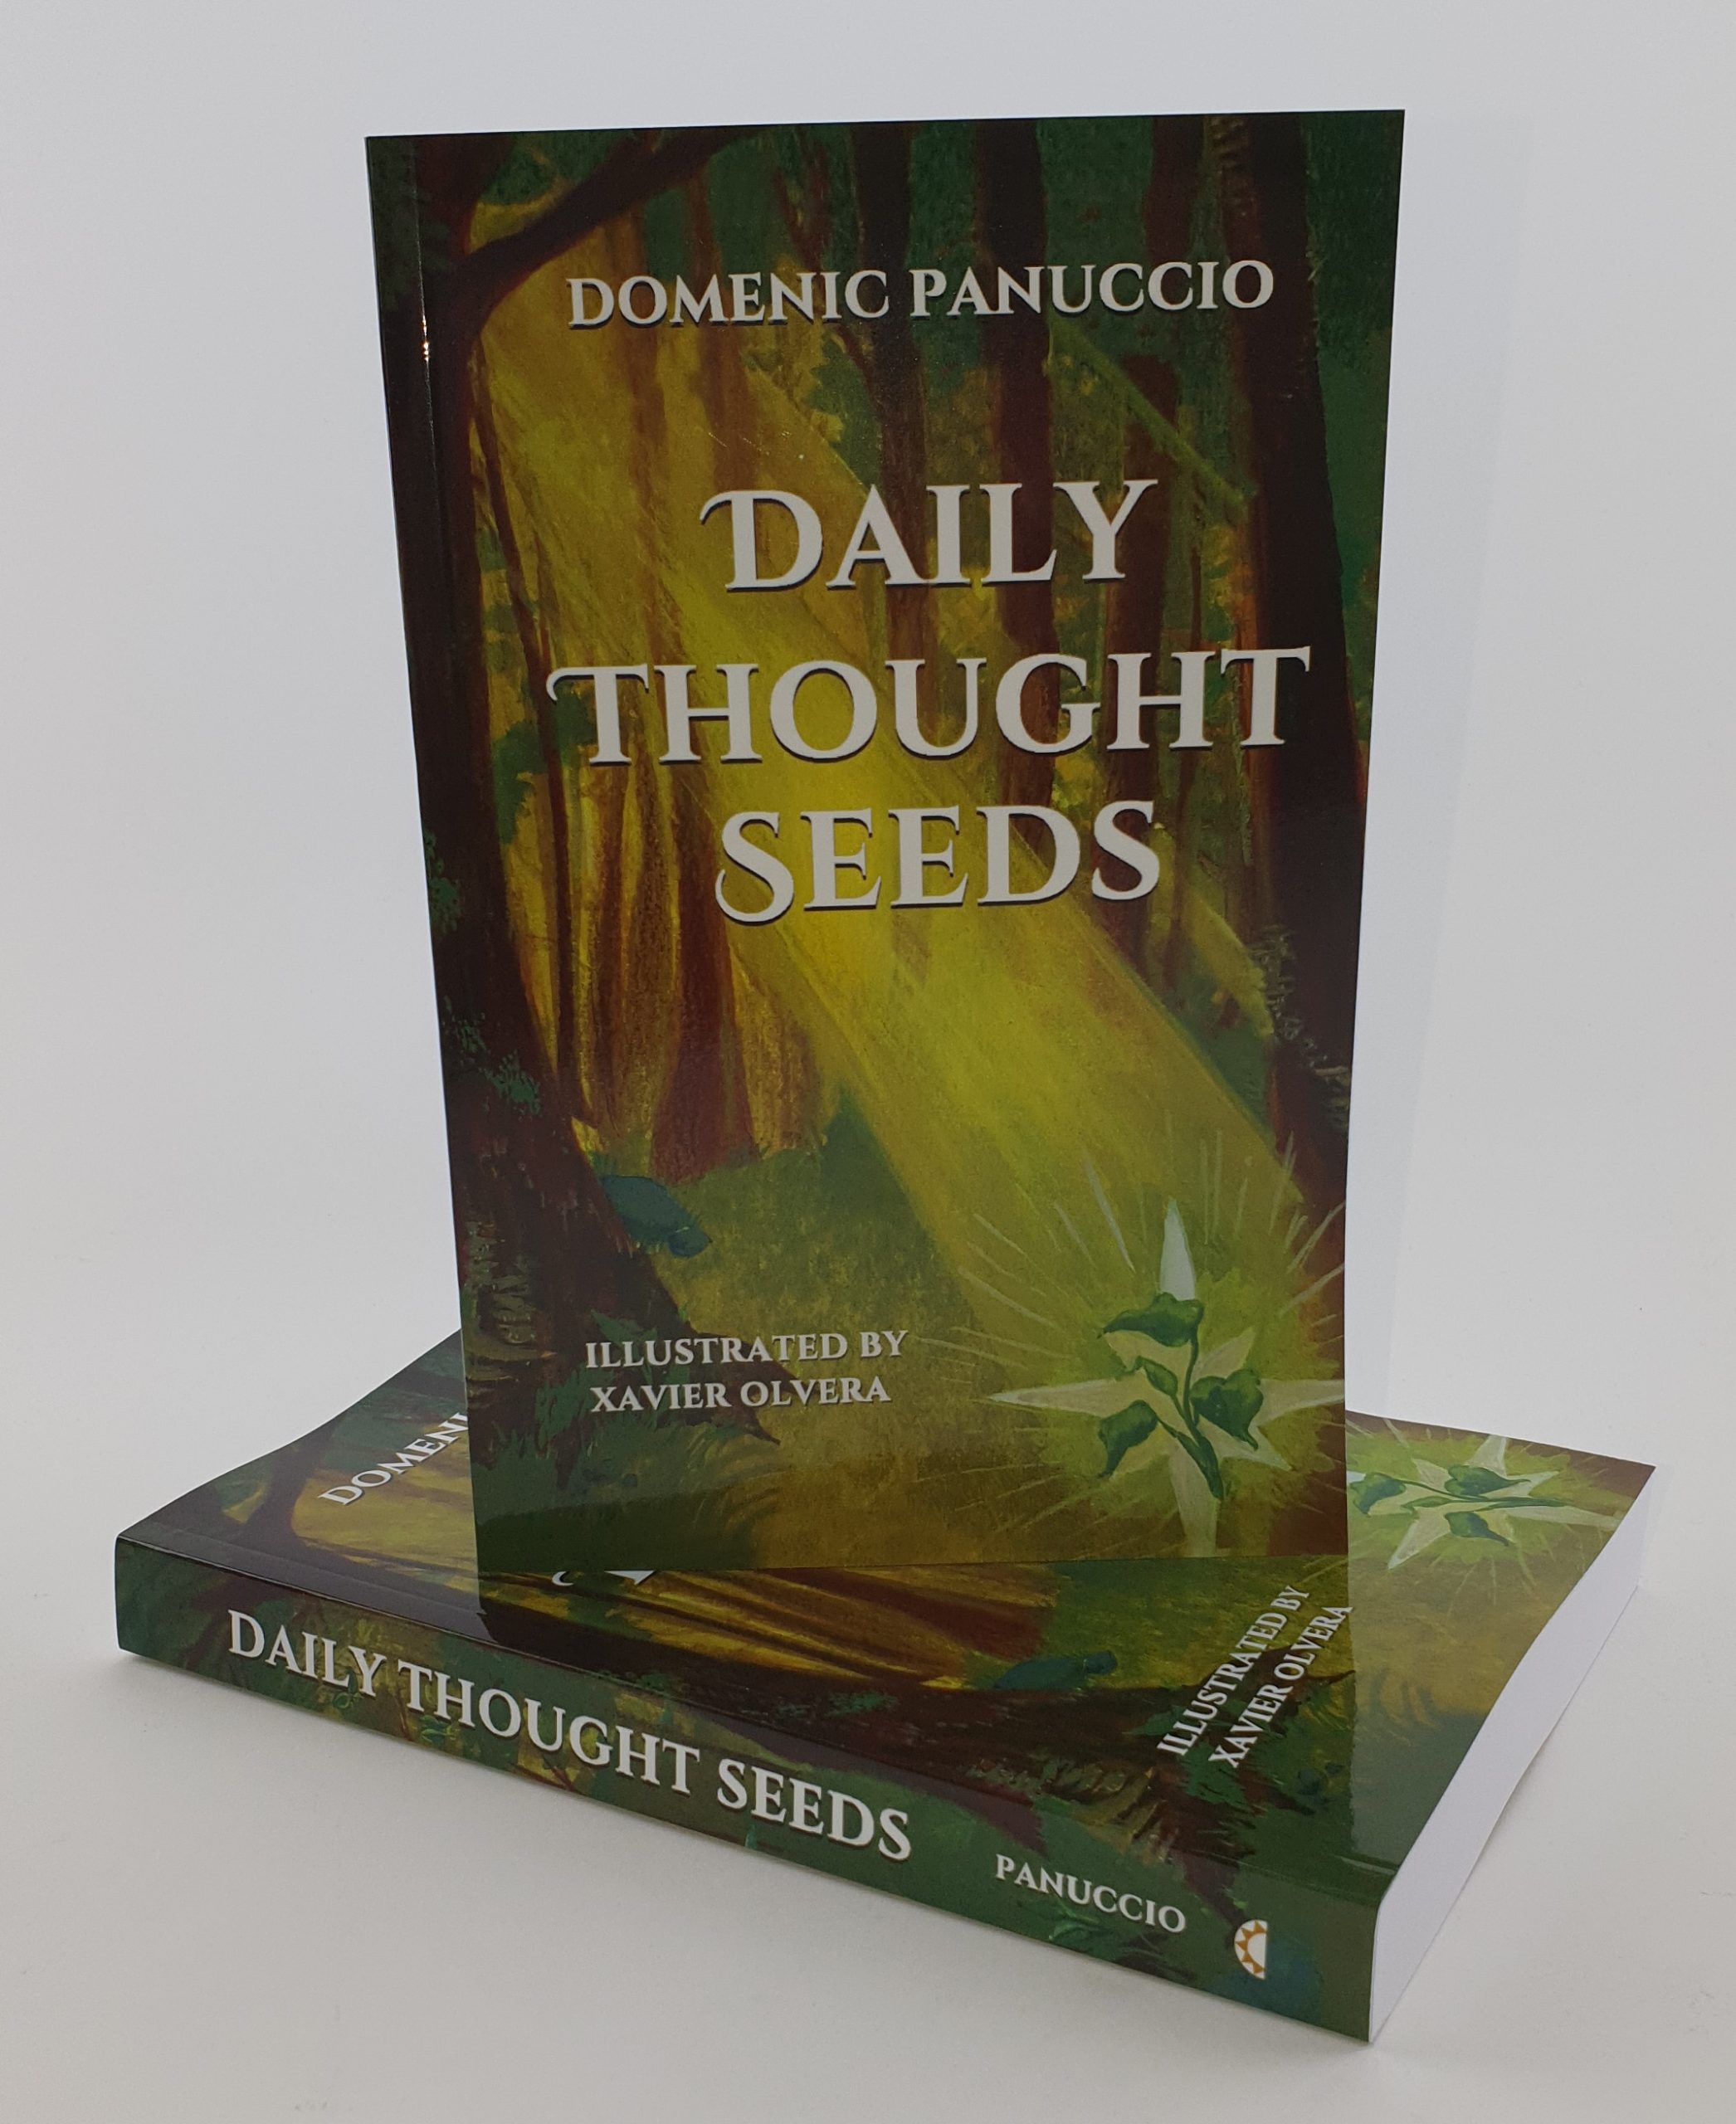 Cover image of self-published book "Daily Thought Seeds"